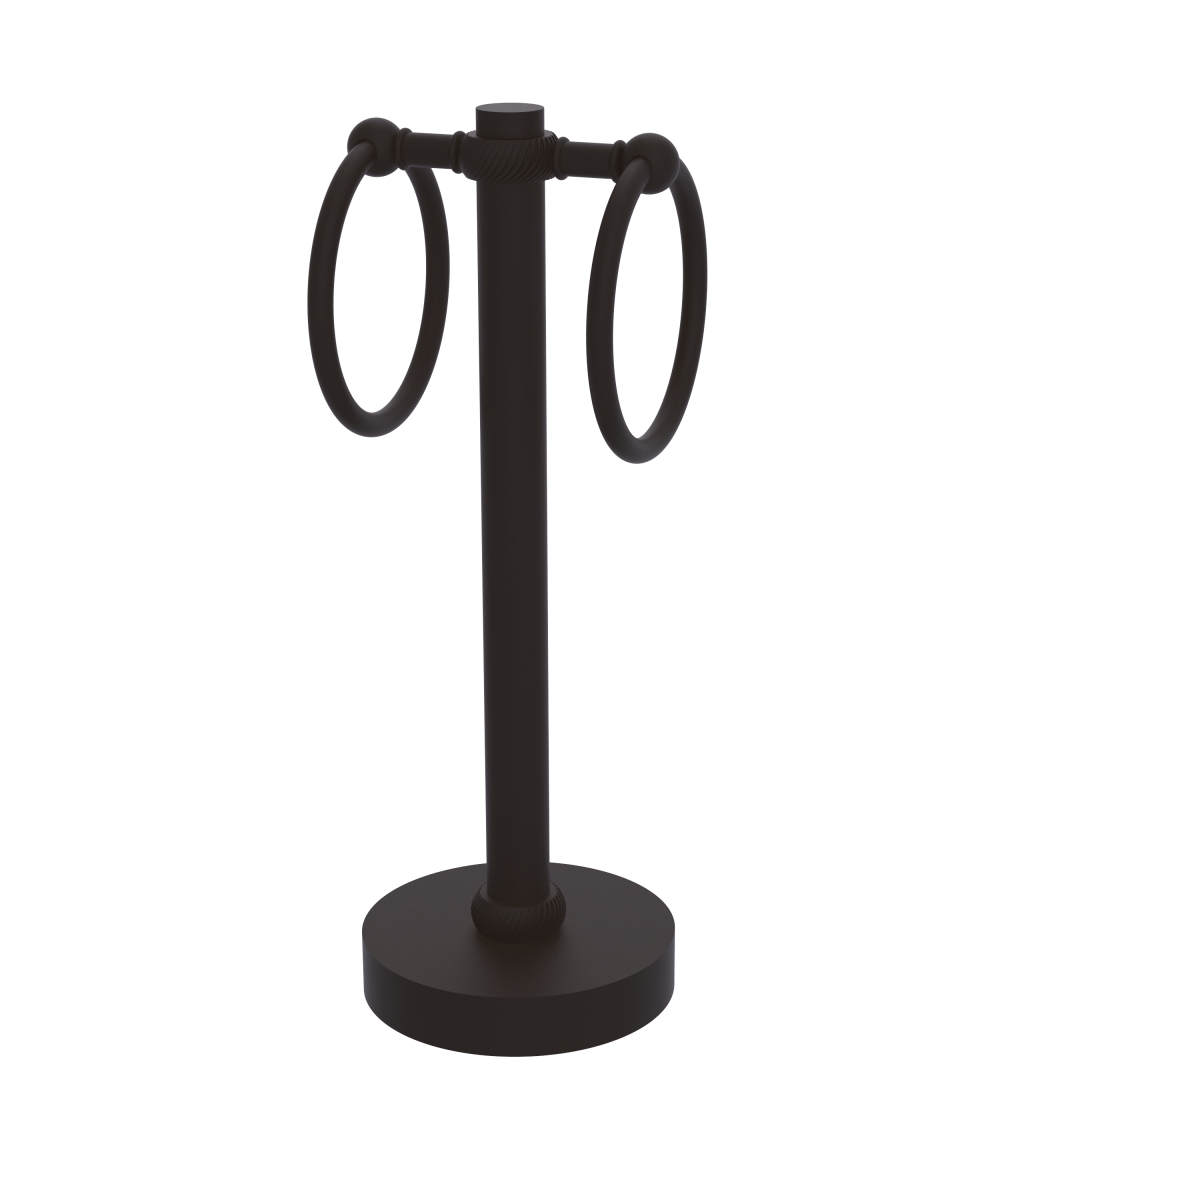 953t-orb Vanity Top 2 Towel Ring Guest Towel Holder With Twisted Accents, Oil Rubbed Bronze